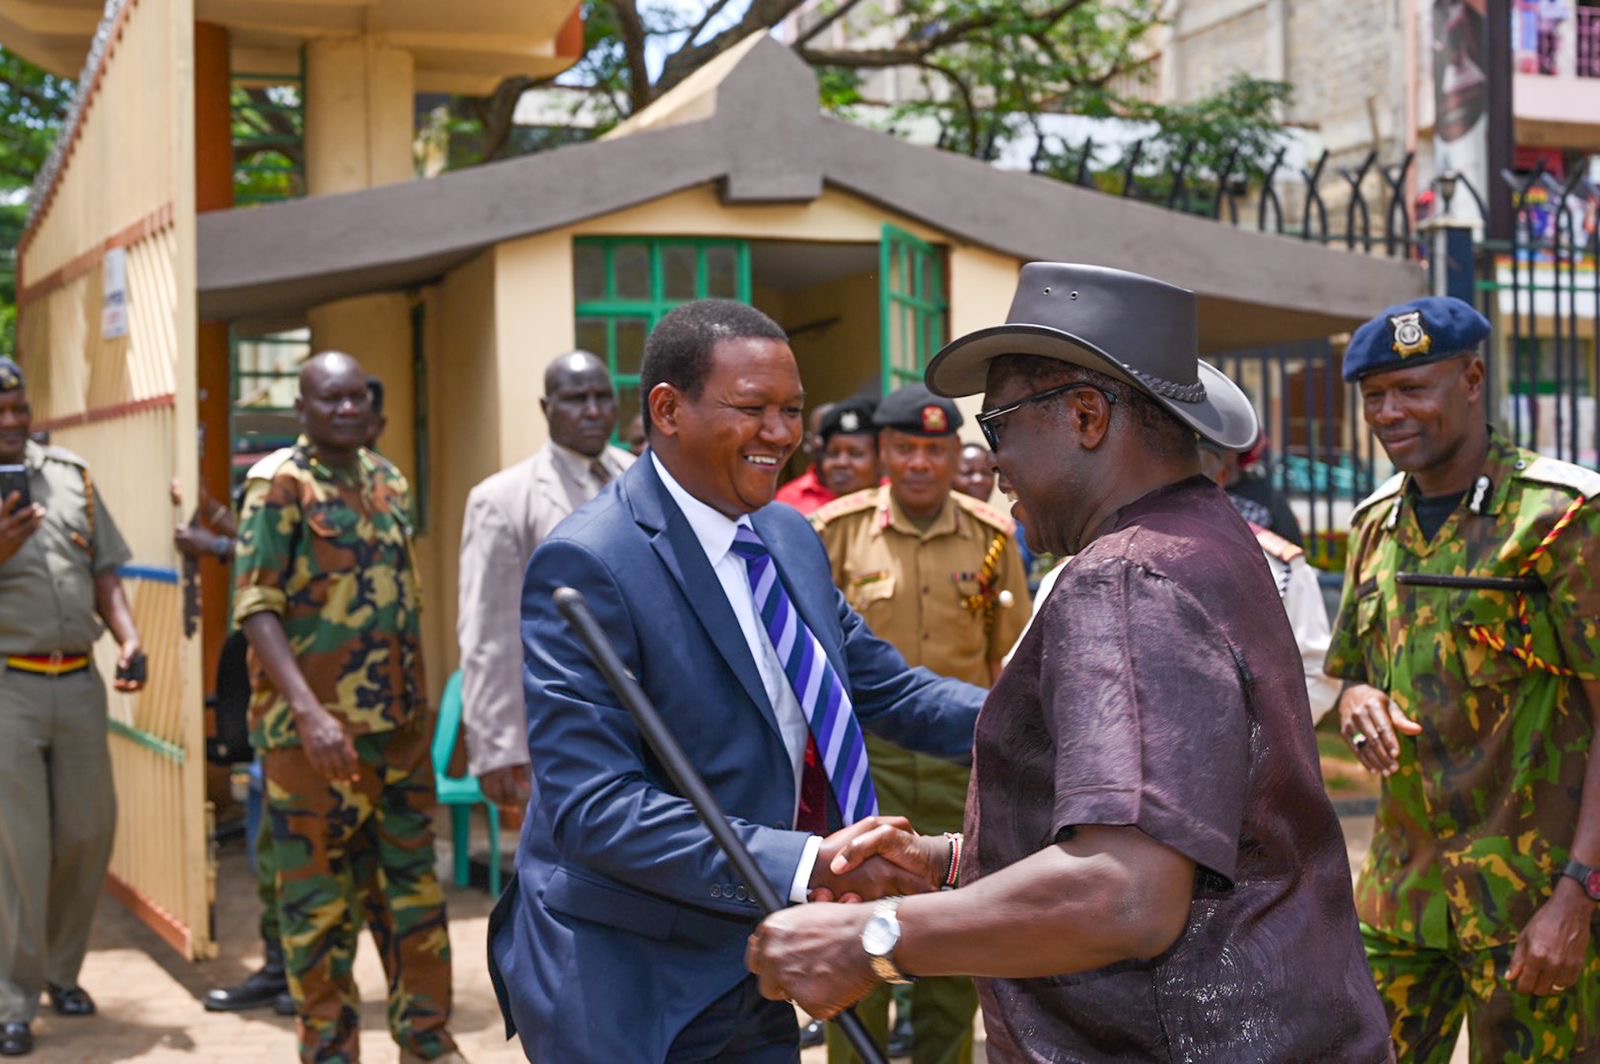 The Cabinet Secretary, Ministry of Tourism and Wildlife, Dr. Alfred Mutua (in navy blue suit) being welcomed by the Governor of Bungoma County, H.E. Rt. Hon. Kenneth Lusaka (wearing a hat).